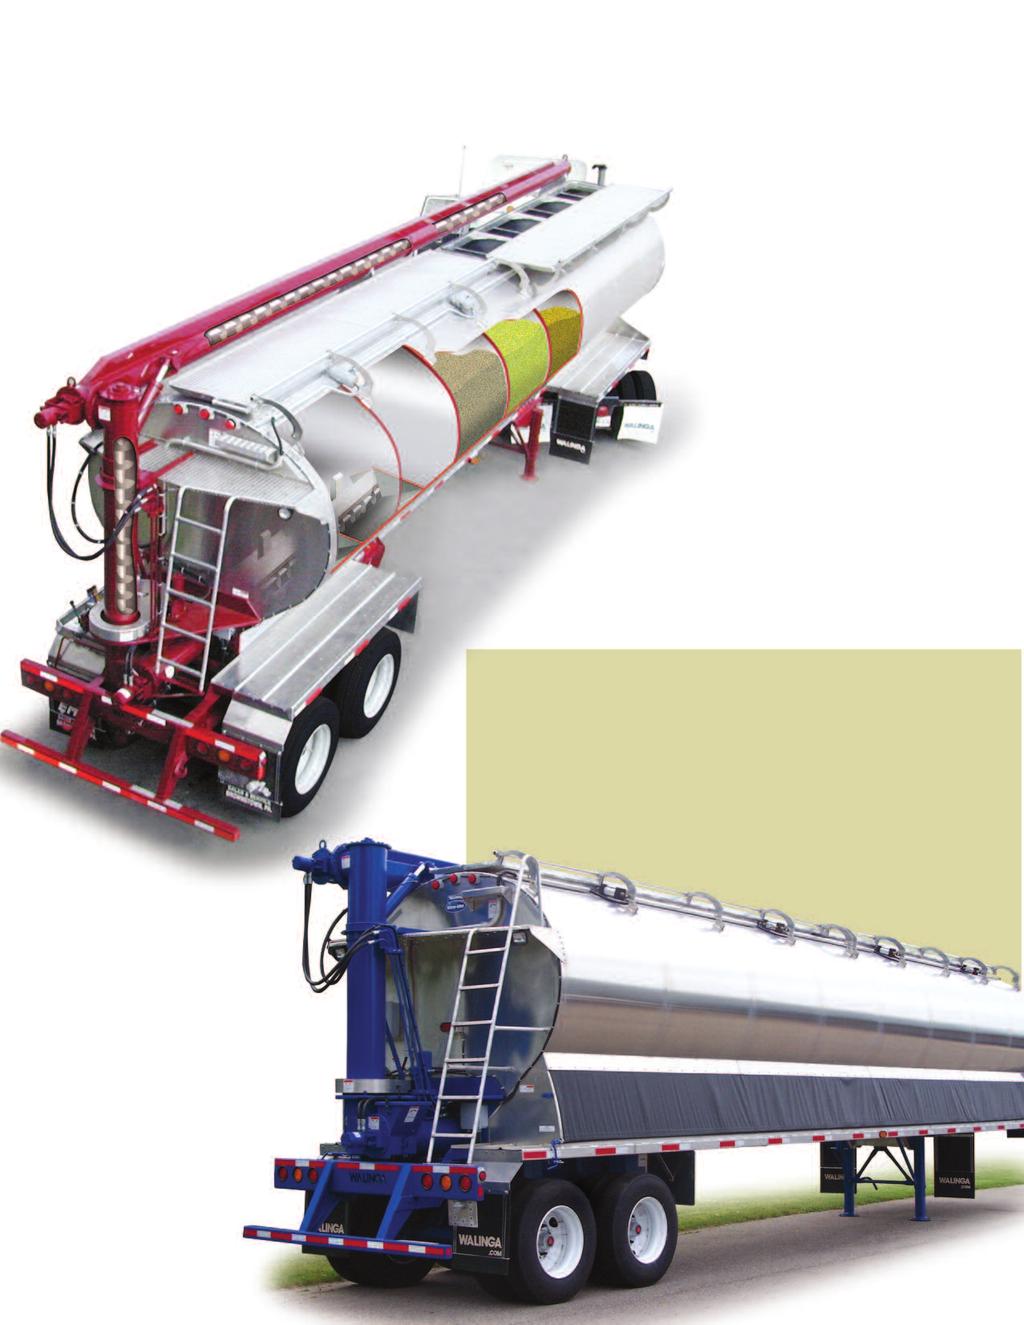 A U G E R D I S C H A R G E Walinga Auger Discharge System For fast and reliable bulk discharge, specify the WALINGA 9-12-9 in. discharge auger system.